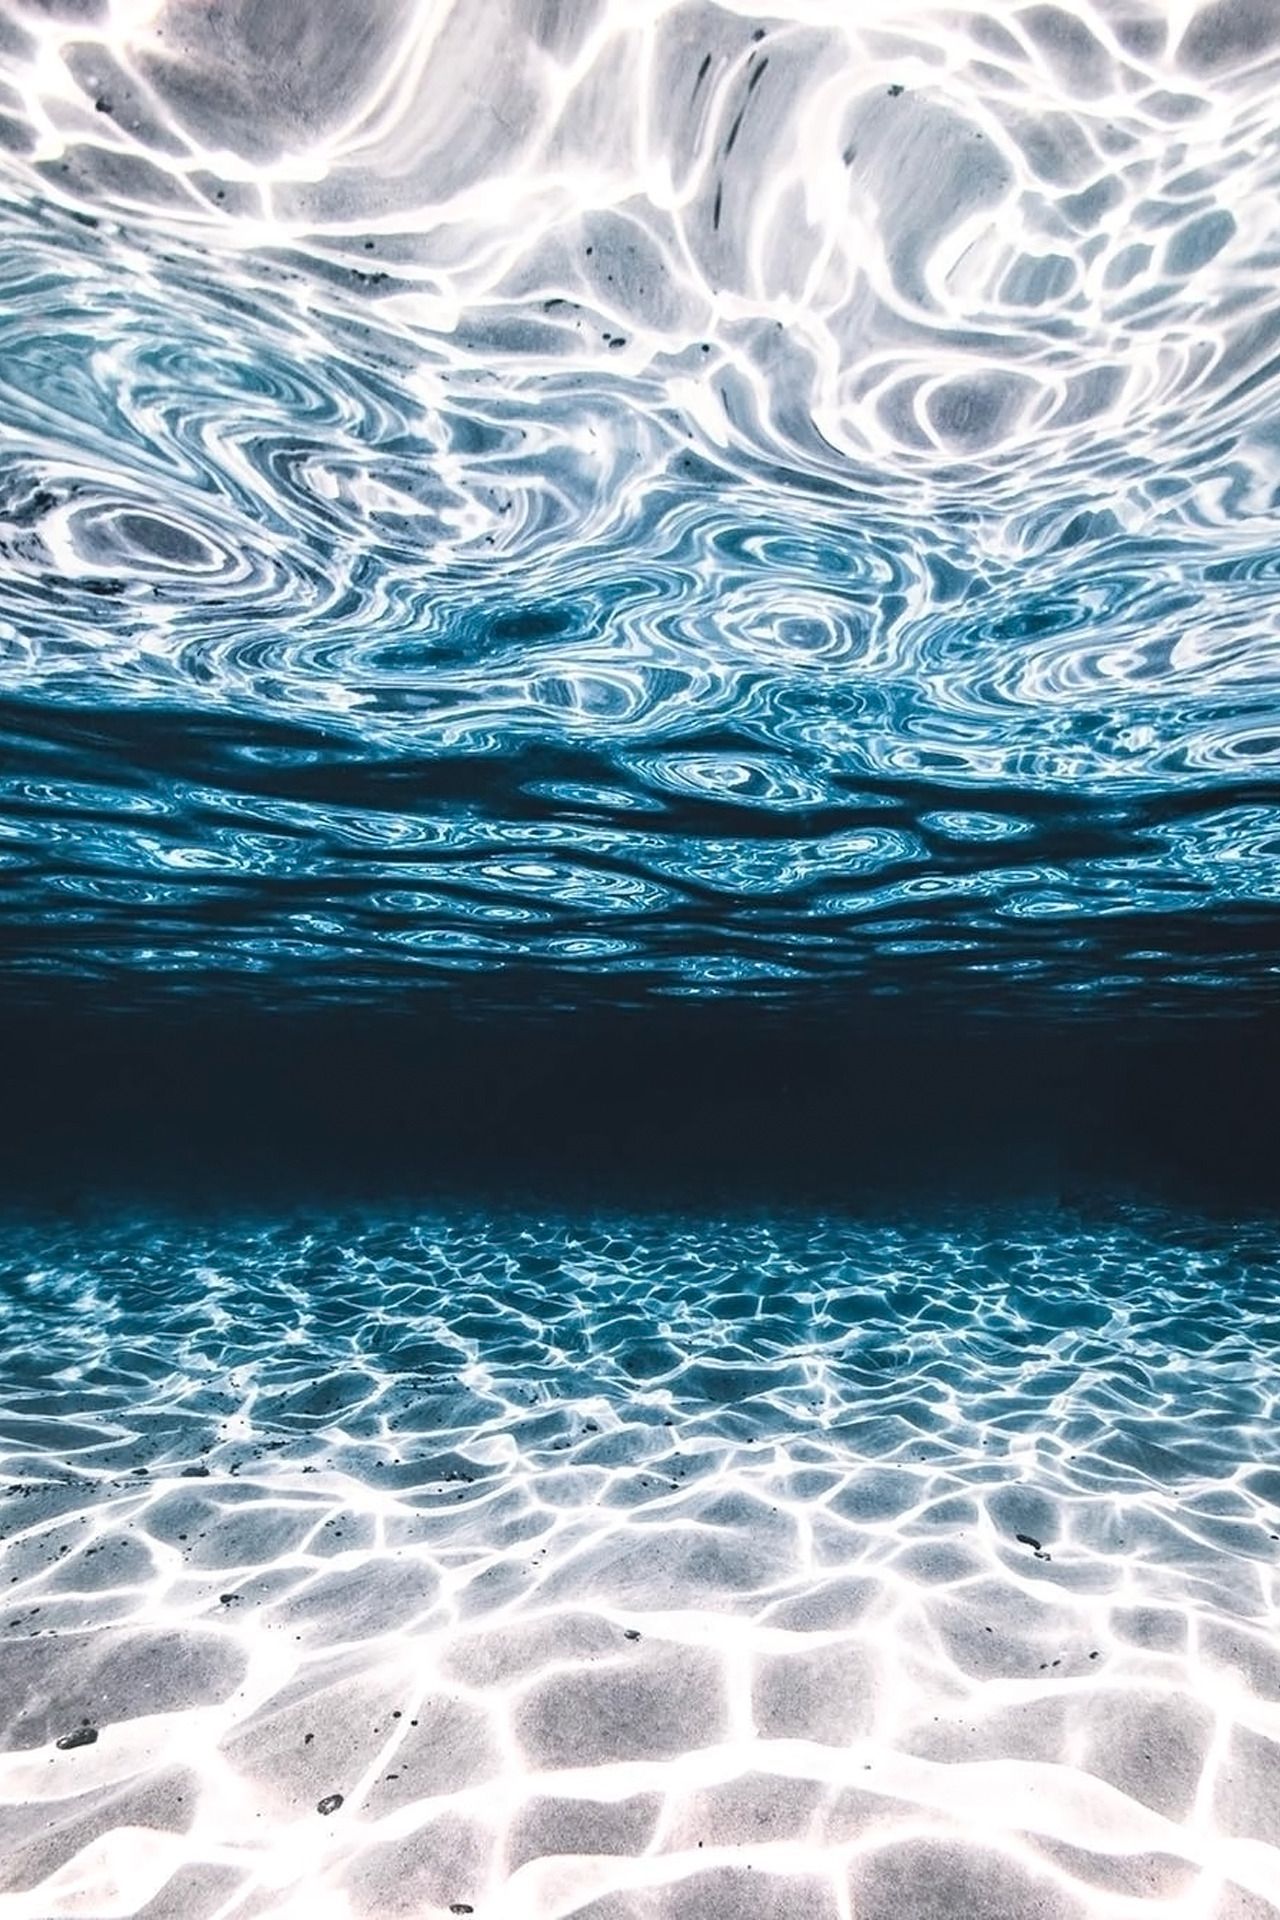 A photo of the ocean floor, with the sunlight shining through the water. - Ocean, water